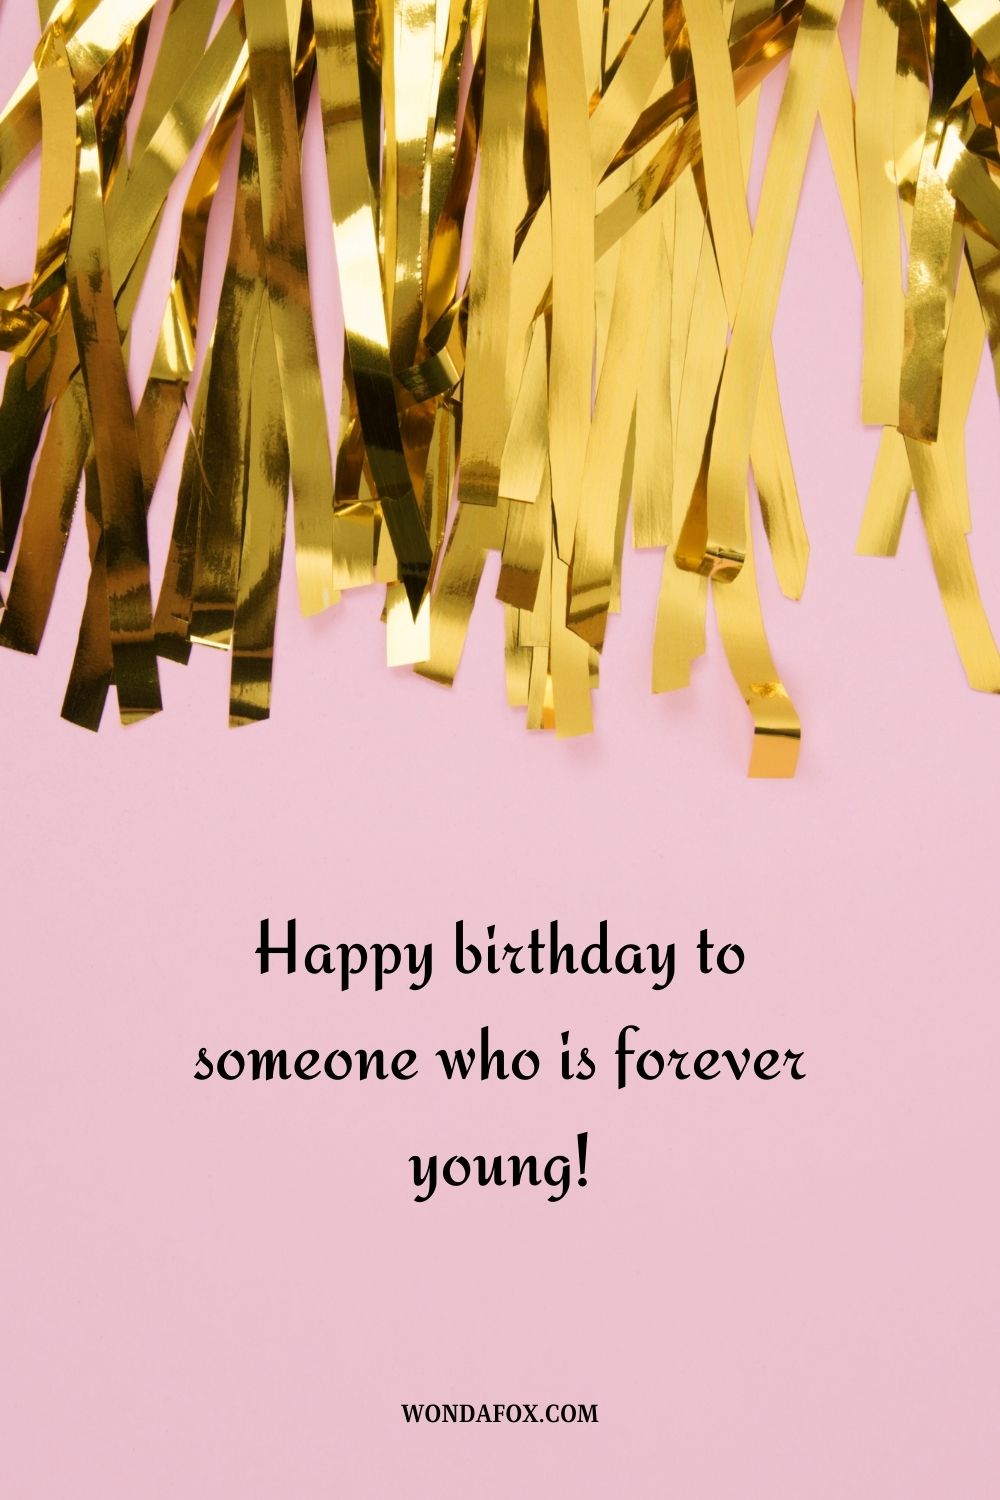 Happy birthday to someone who is forever young!